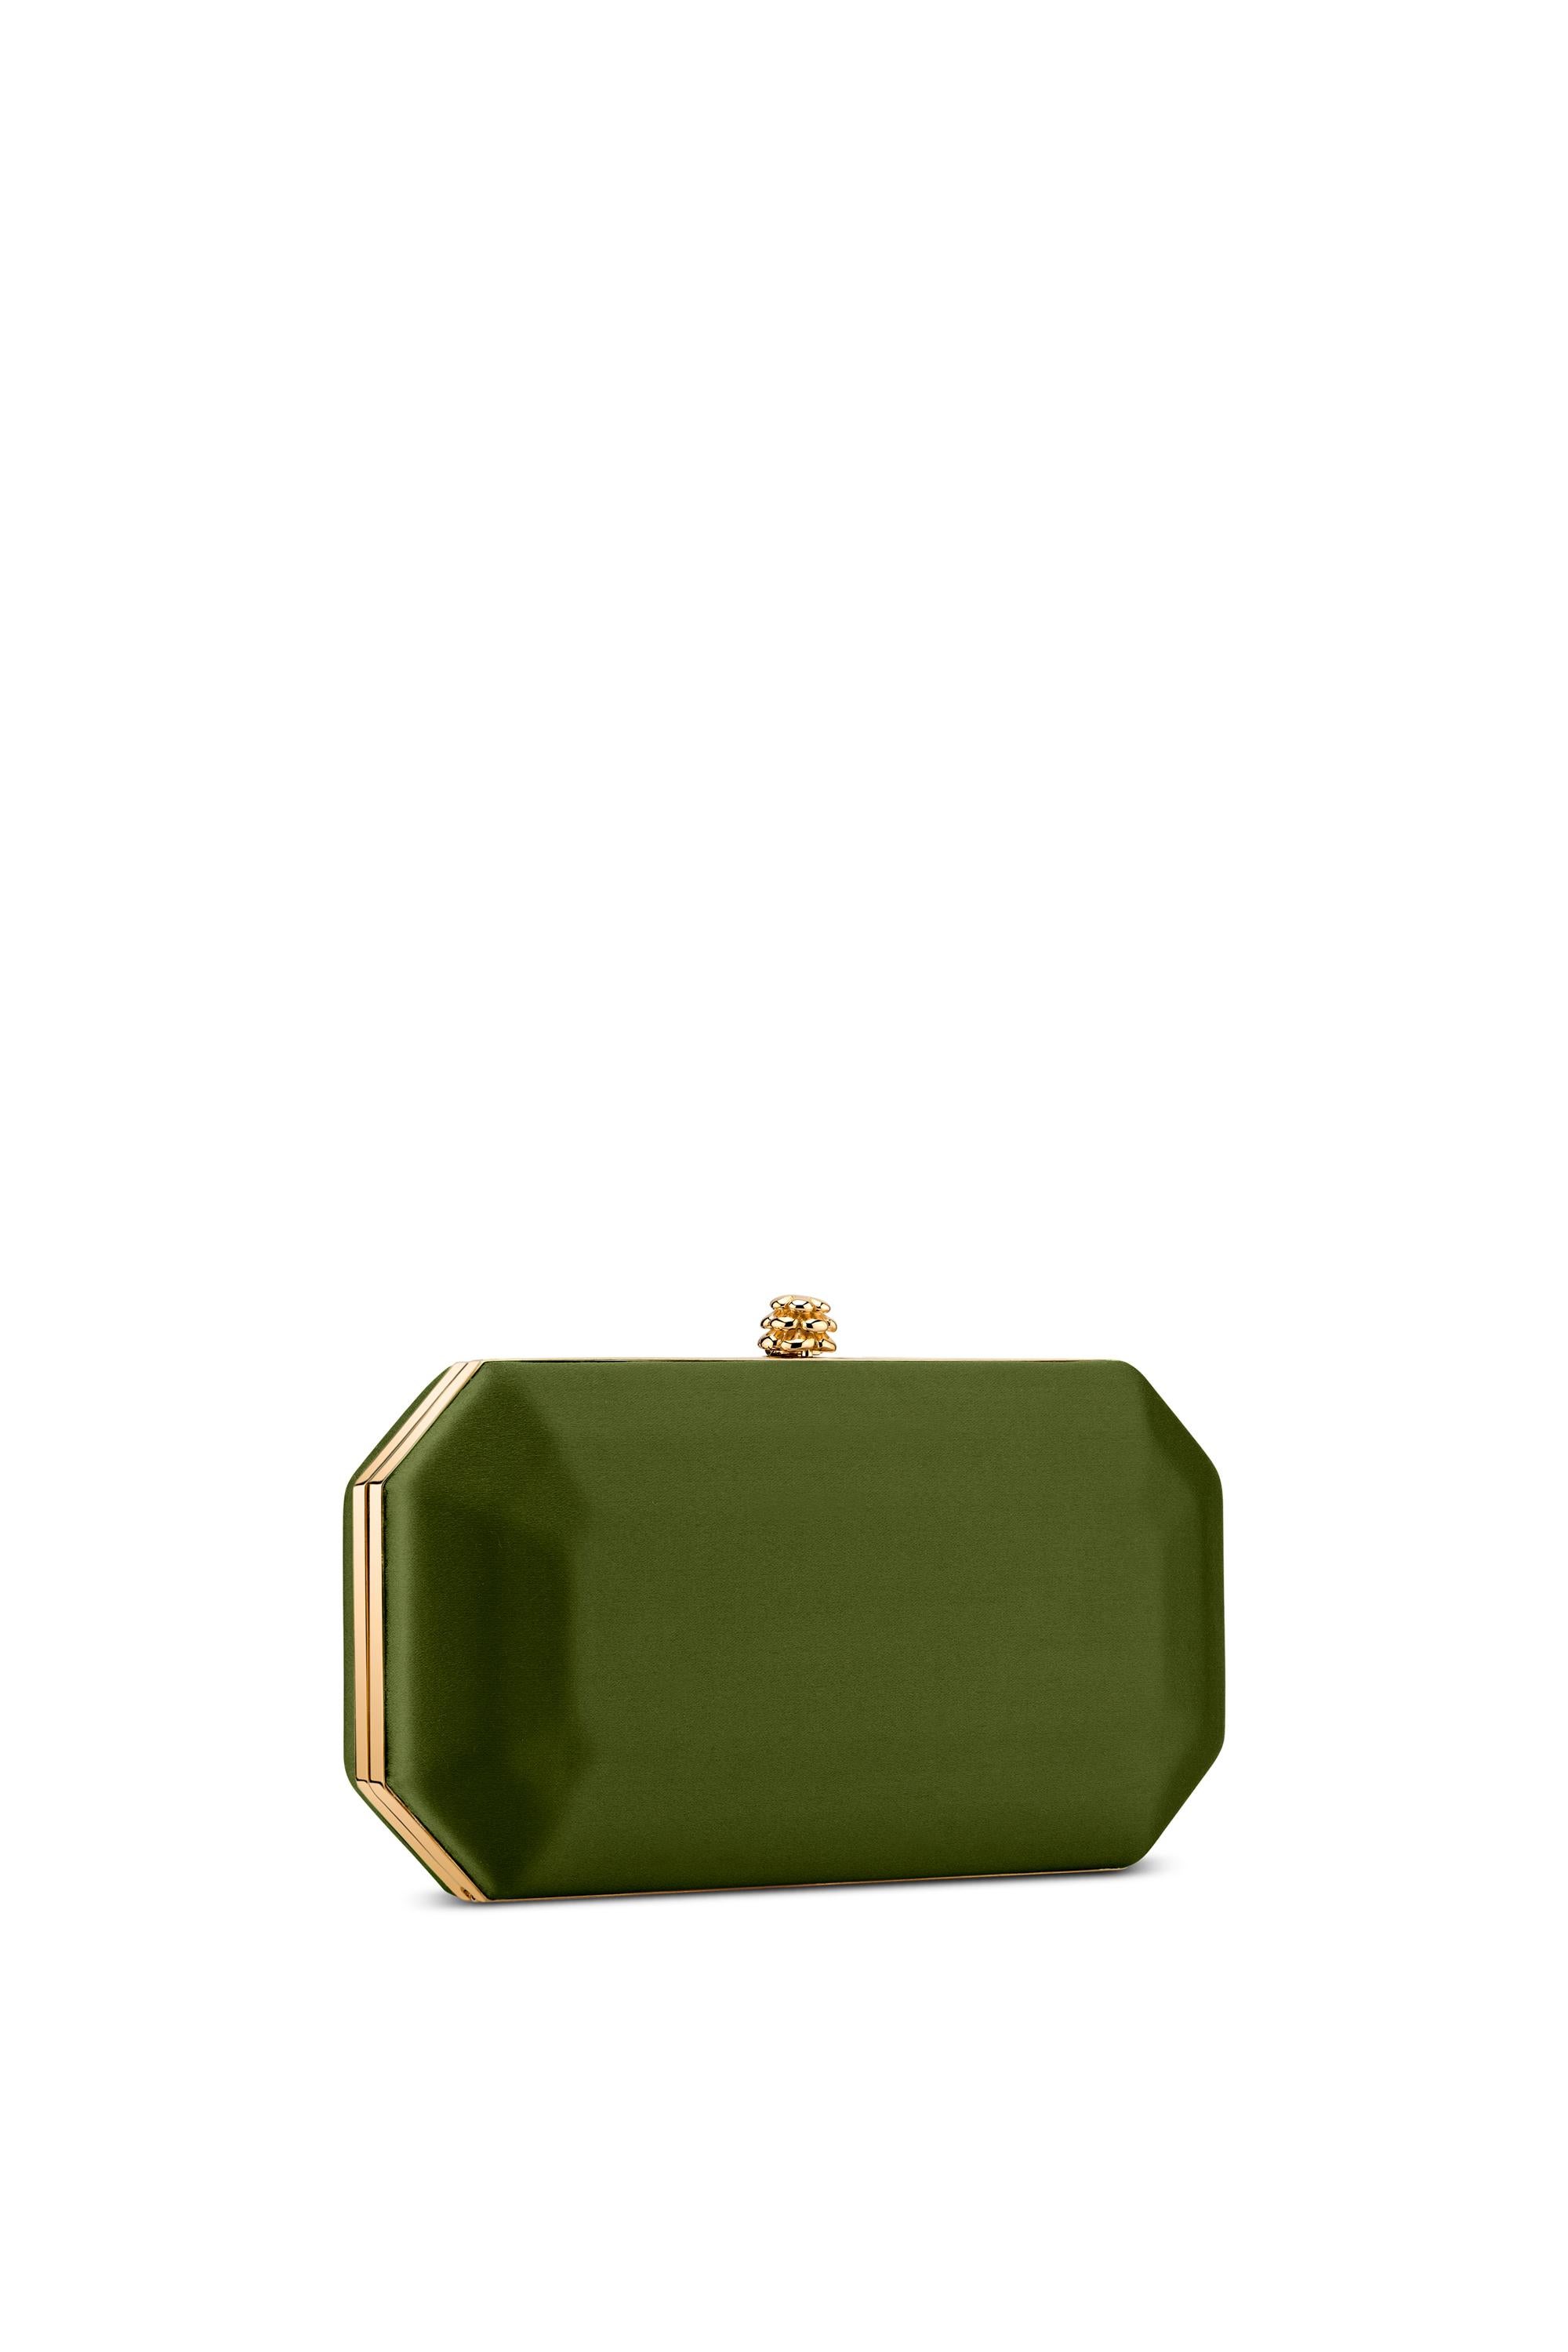 TYLER ELLIS Perry Small Clutch Army Green Satin Gold Hardware In New Condition In Los Angeles, CA